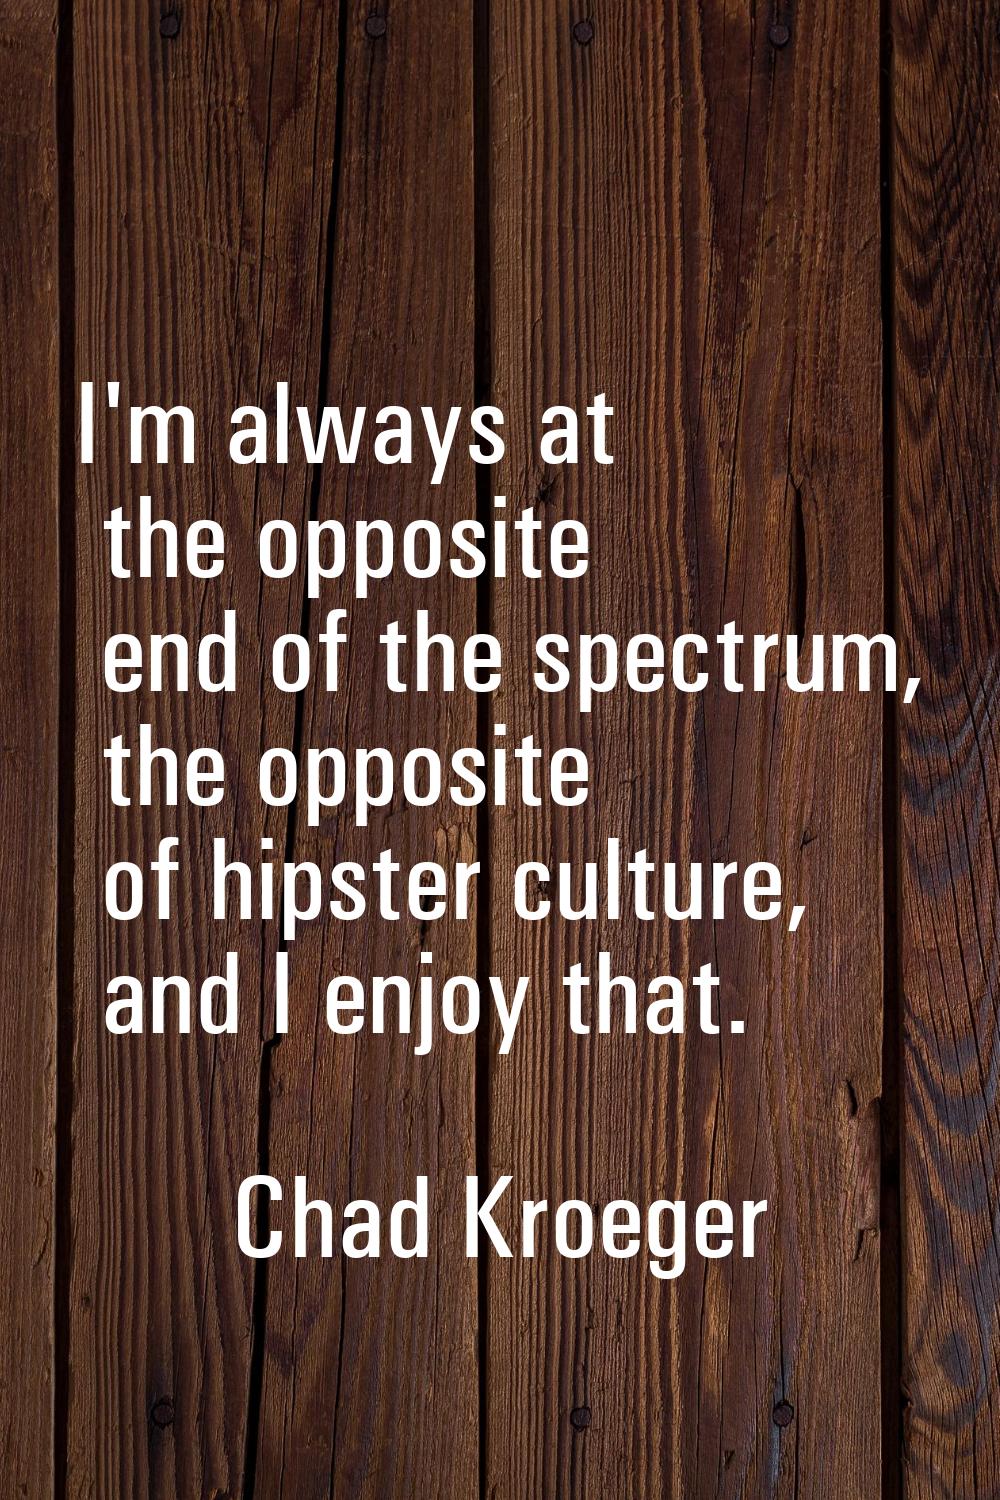 I'm always at the opposite end of the spectrum, the opposite of hipster culture, and I enjoy that.